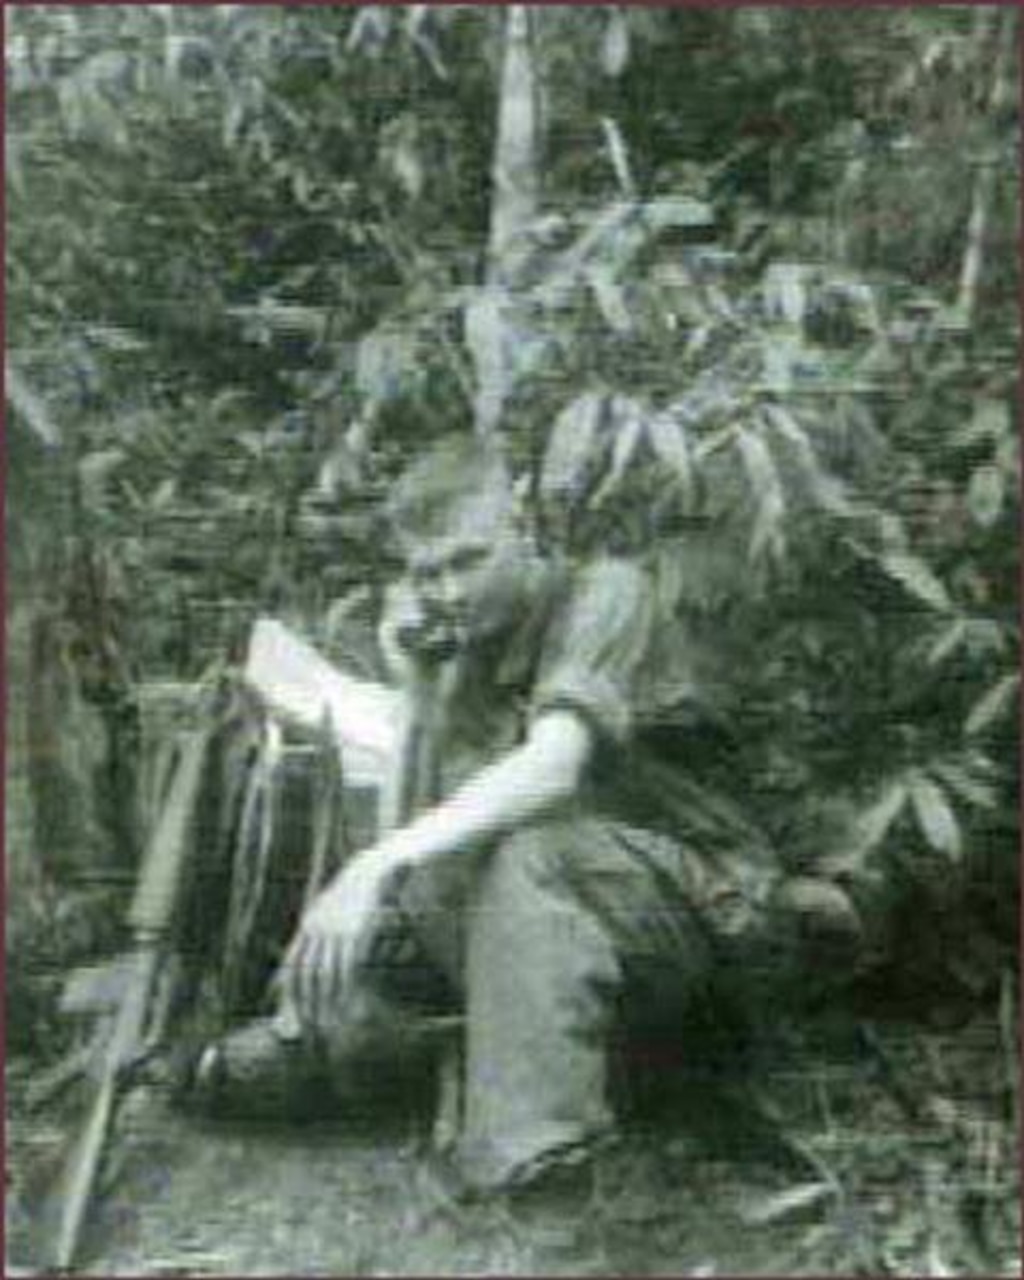 A teenager squats near a bush while holding a telephone to his ear. A rifle is propped near him.